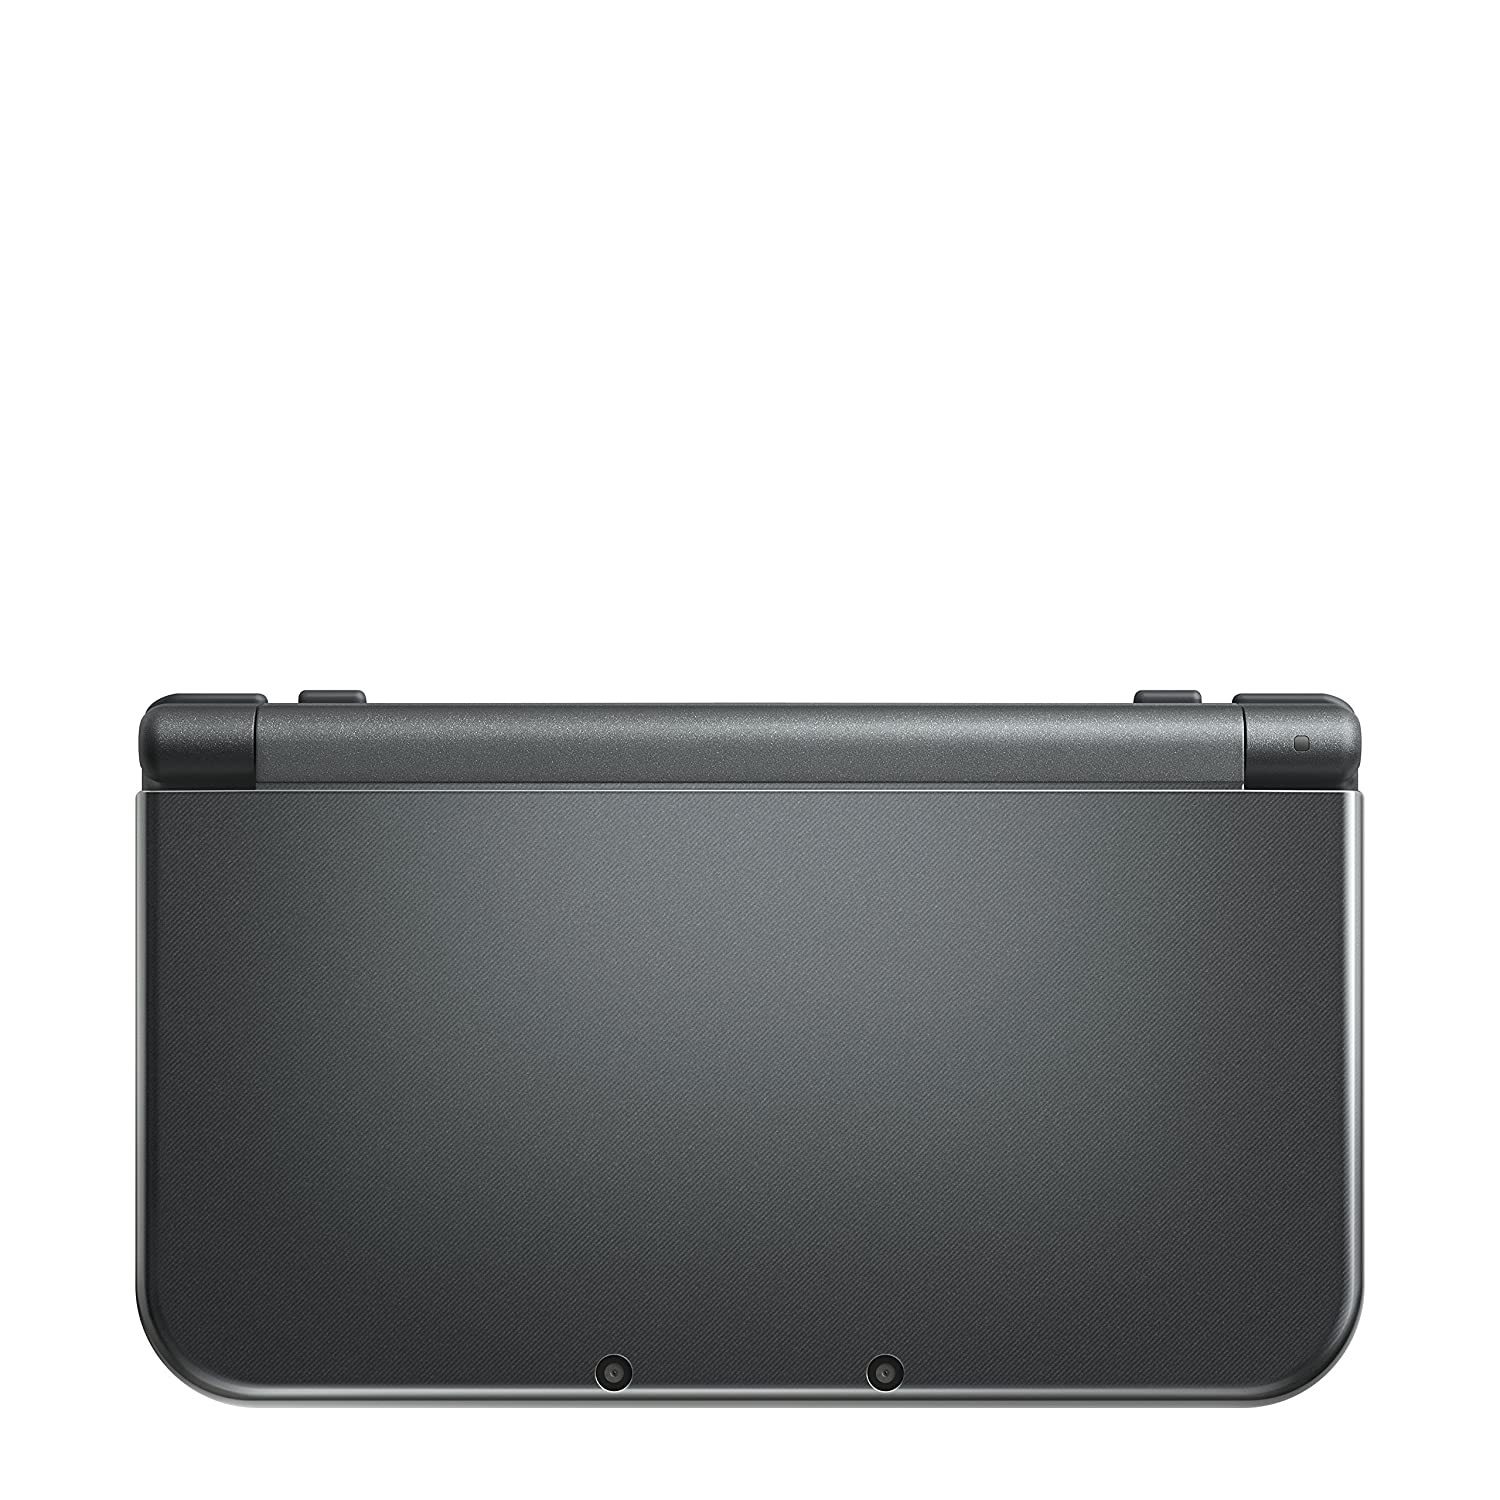 3DS XL System - image 3 of 5